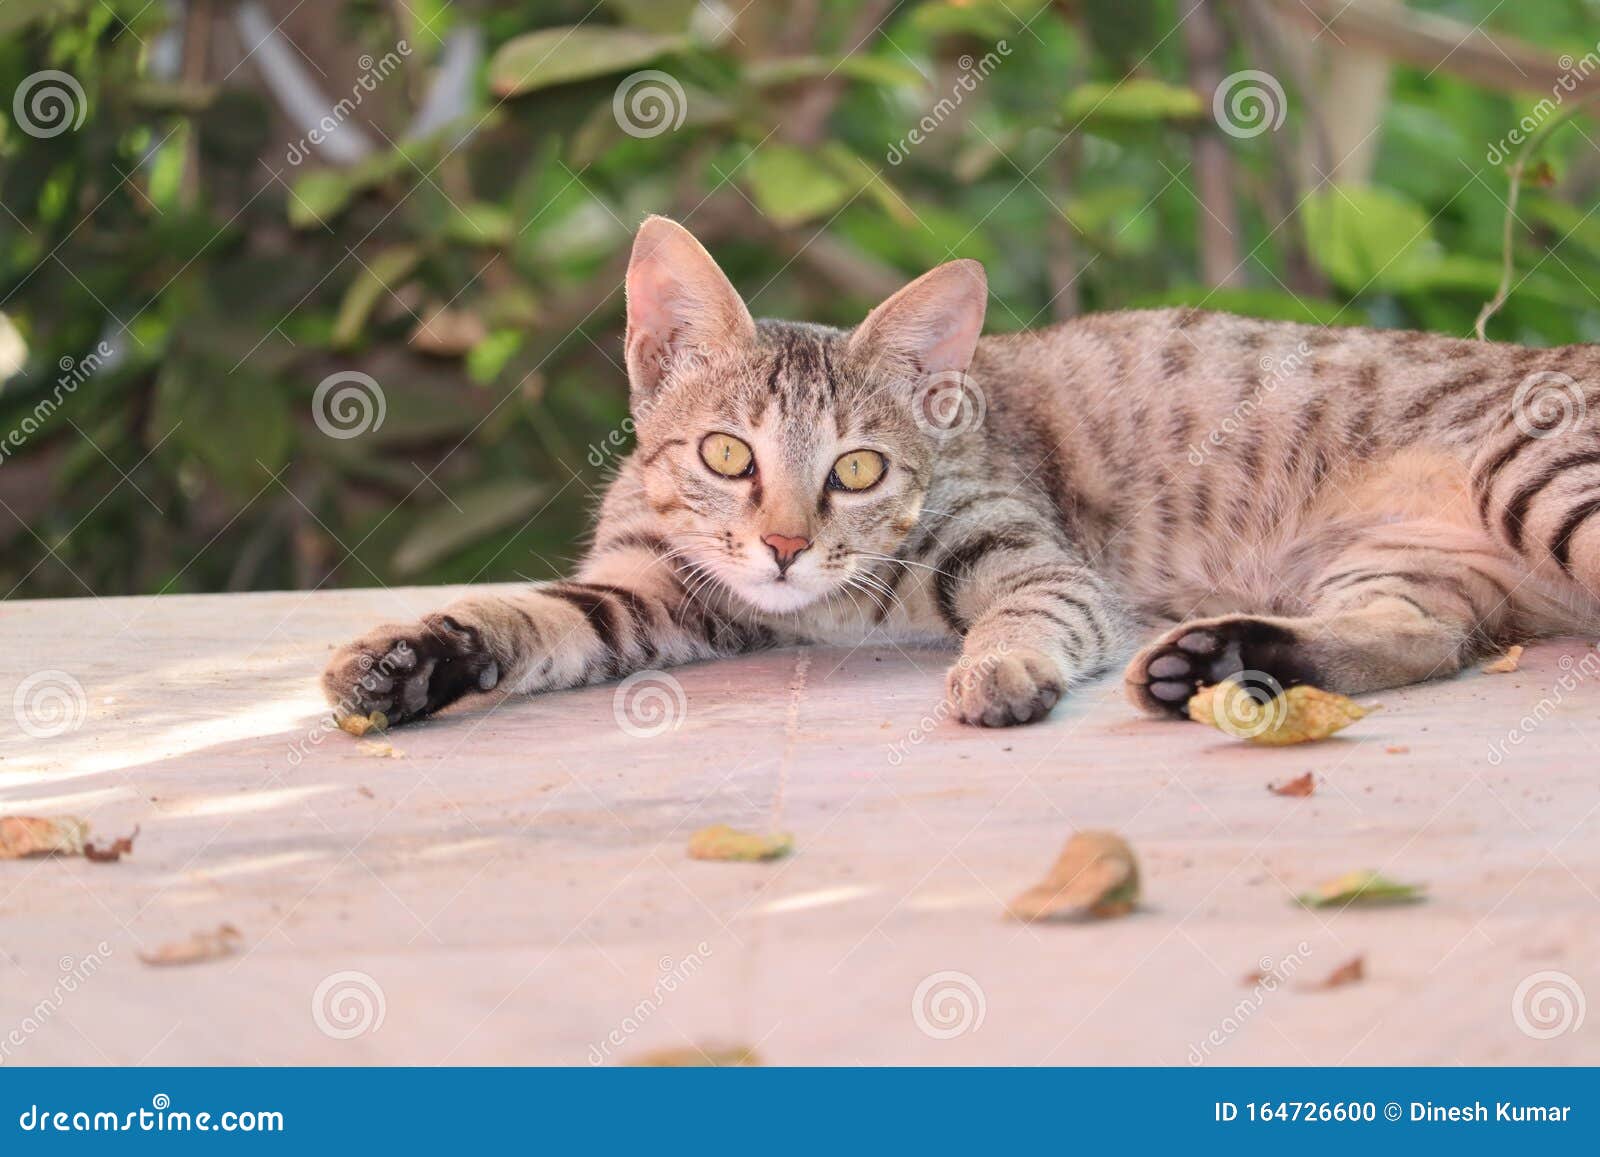 Can You Own A Rusty Spotted Cat As A Pet Cat Looking At Camera The Rusty Spotted Cat Is Smallest Members Of Wild Cat Found Only In India And Known As Hummingbird Of The Stock Photo Image Of Portrait Paws 164726600